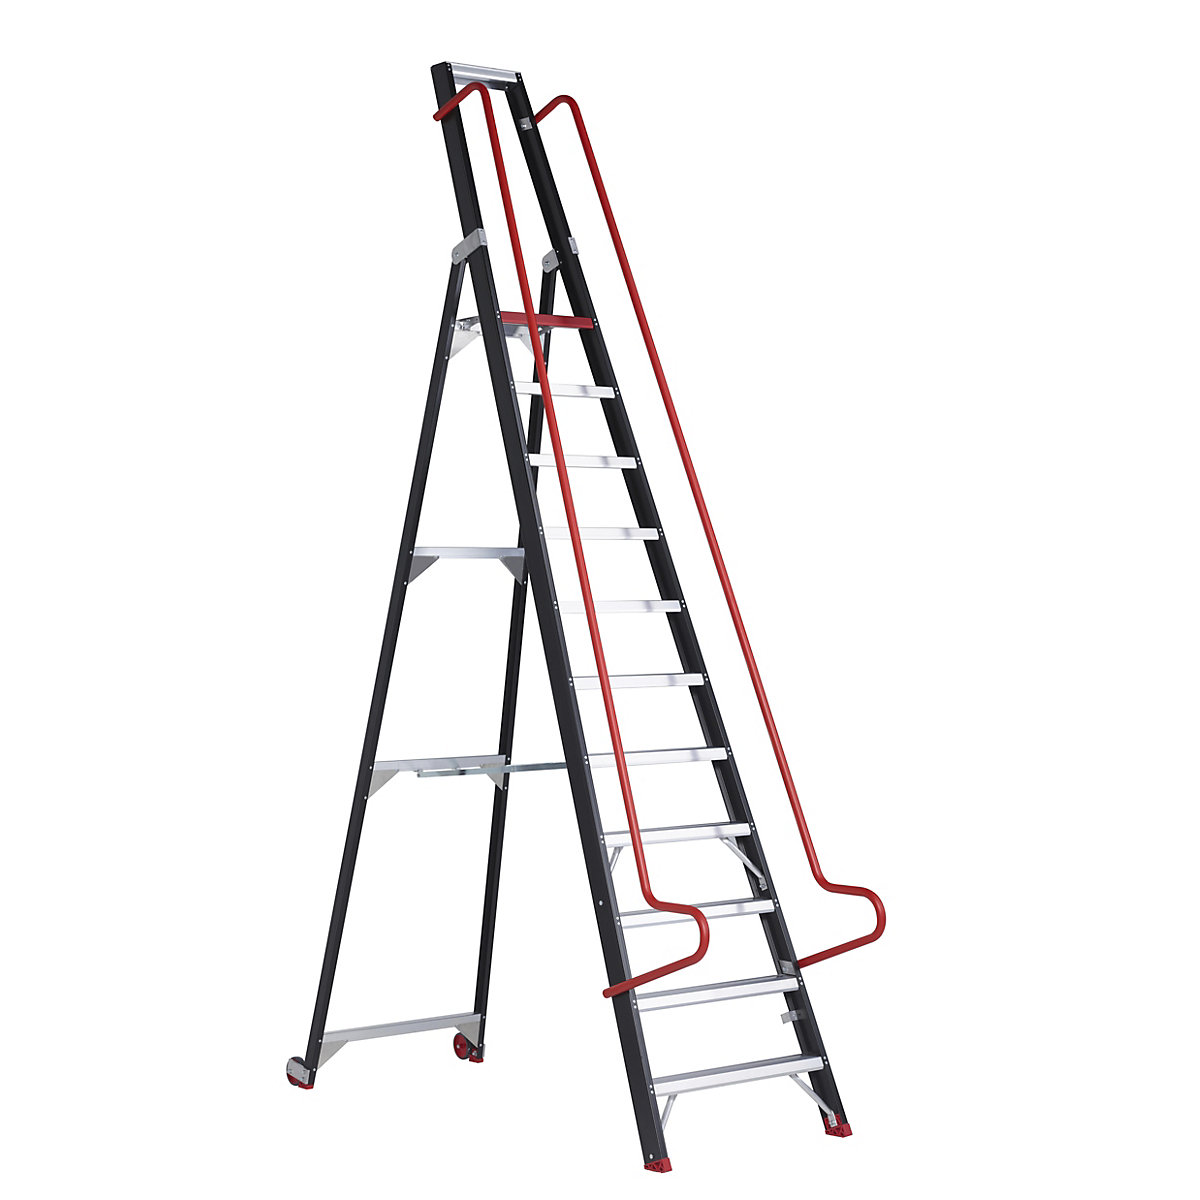 Mobile warehouse steps – Altrex, with safety hand rails, 11 steps incl. platform-6